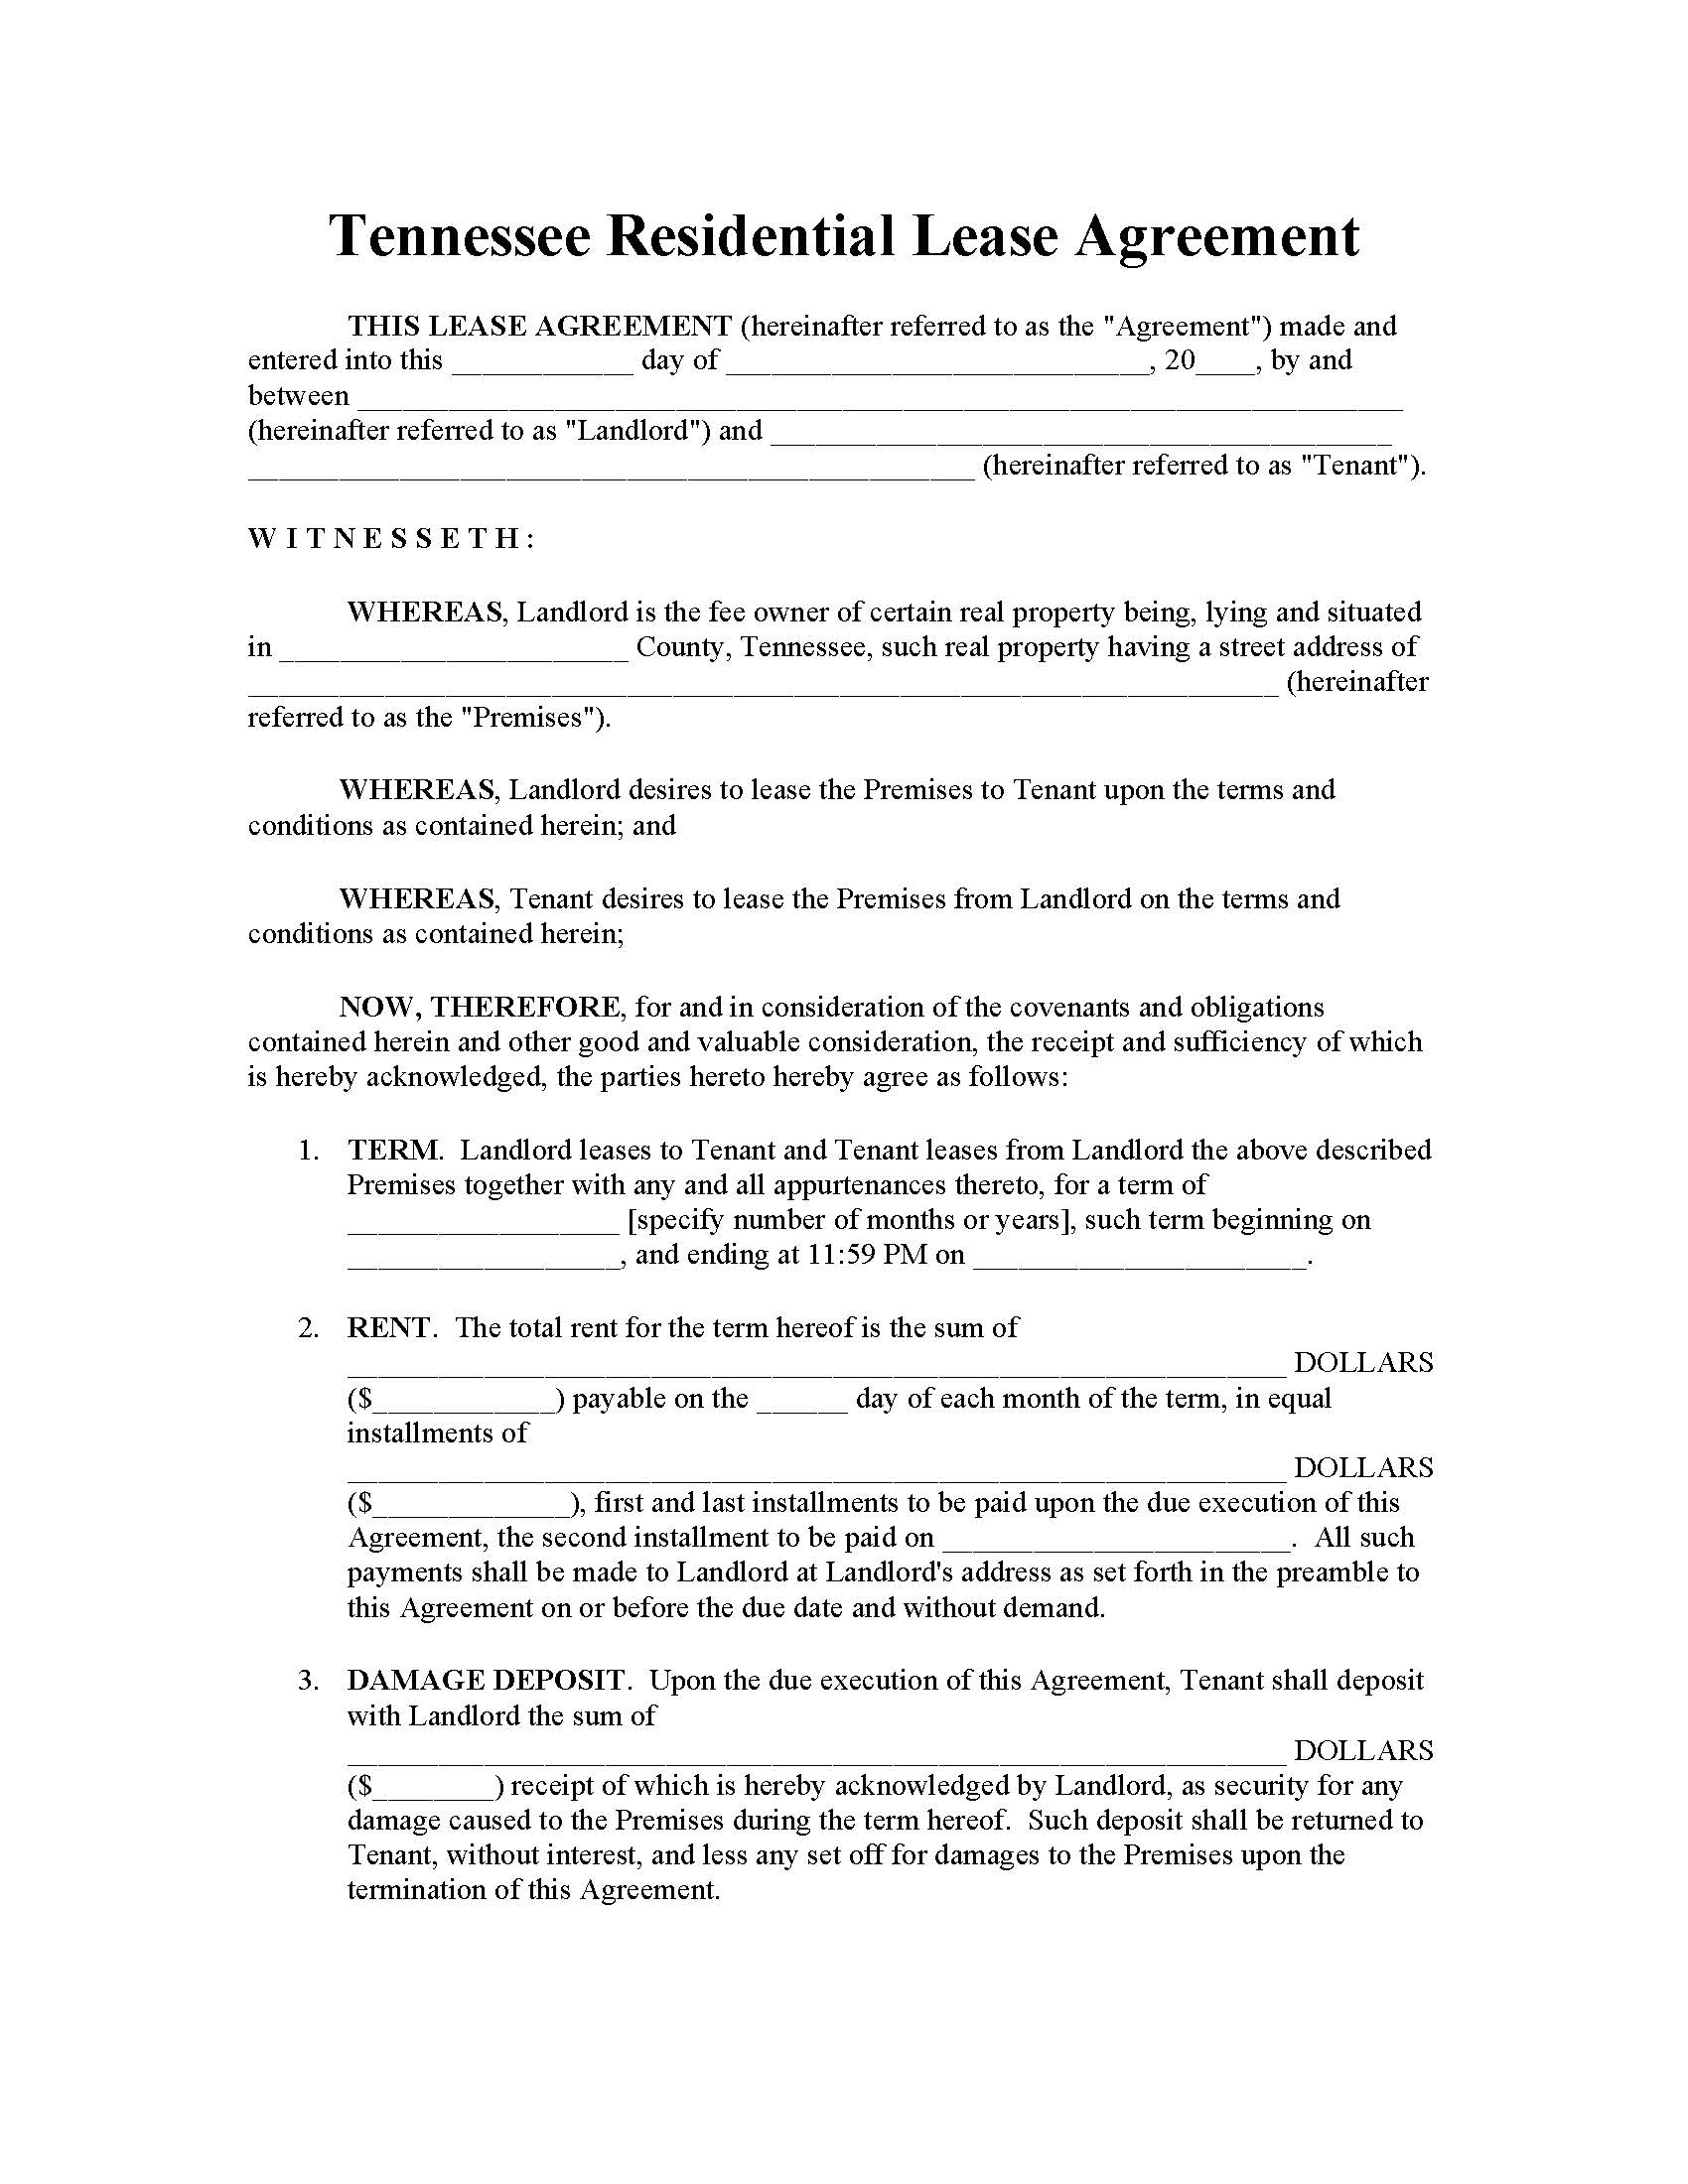 free-tennessee-standard-residential-lease-agreement-template-pdf-word